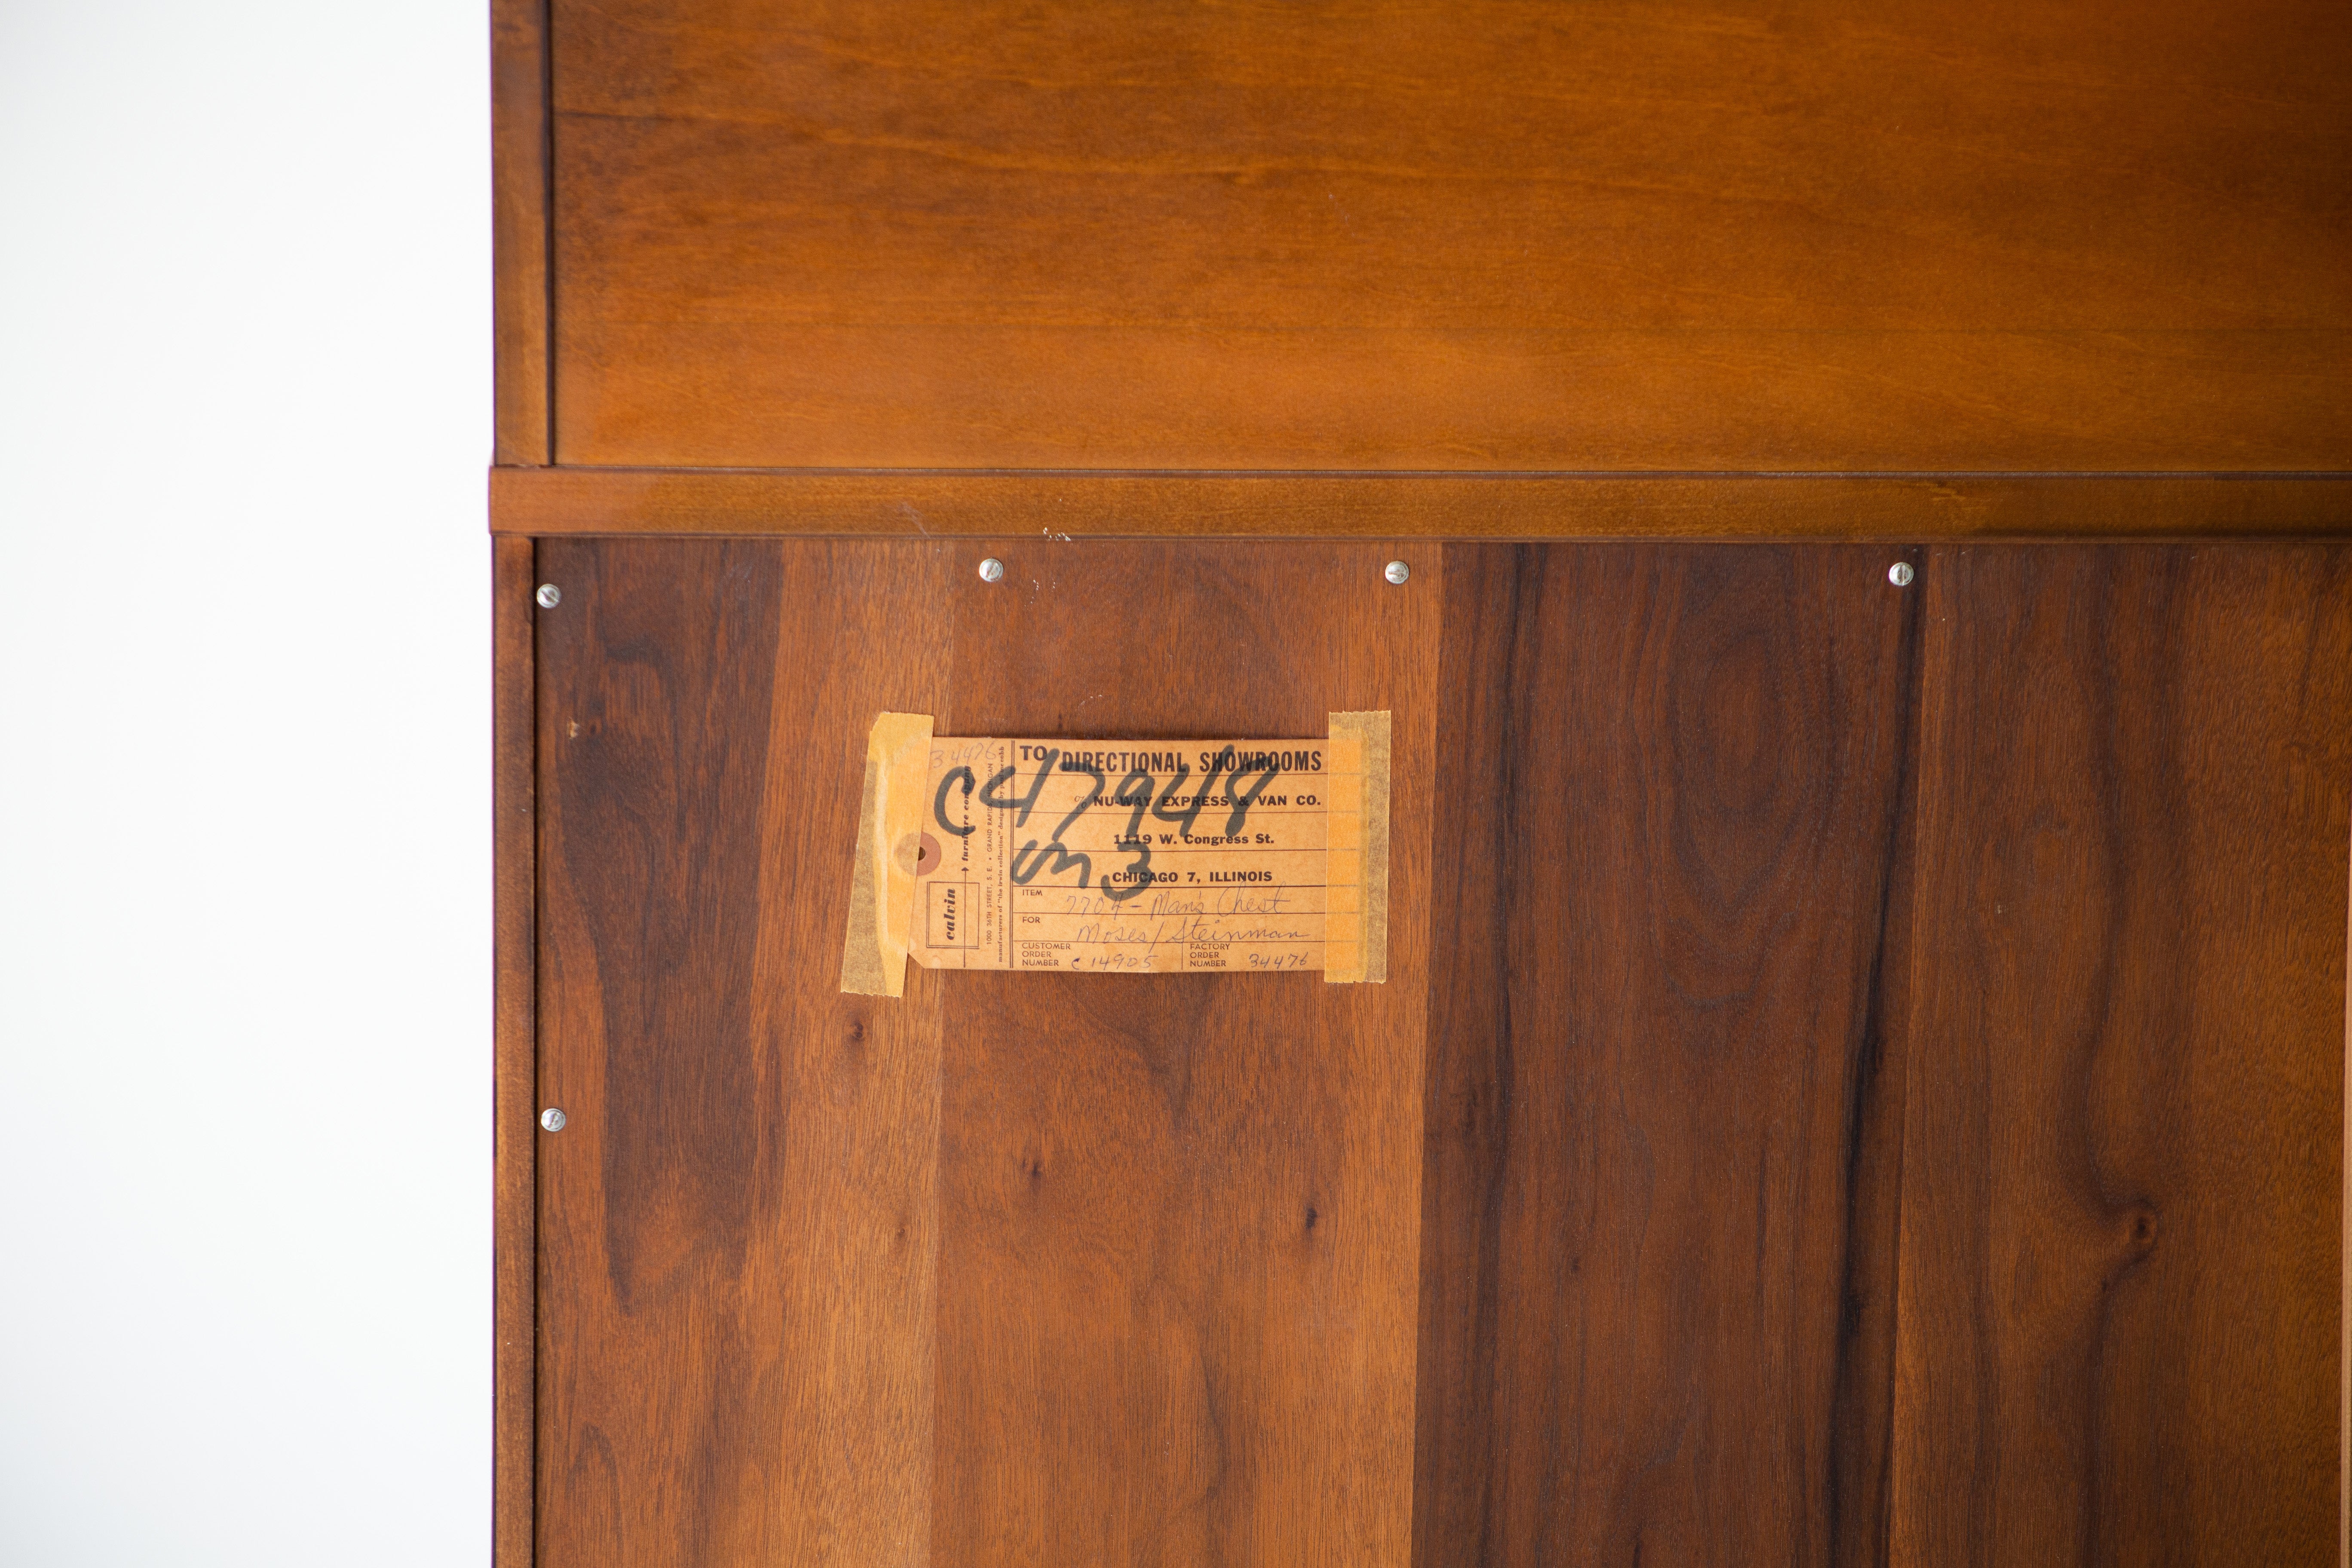 Paul McCobb Gentleman's Chest for Calvin Furniture : Irwin Collection